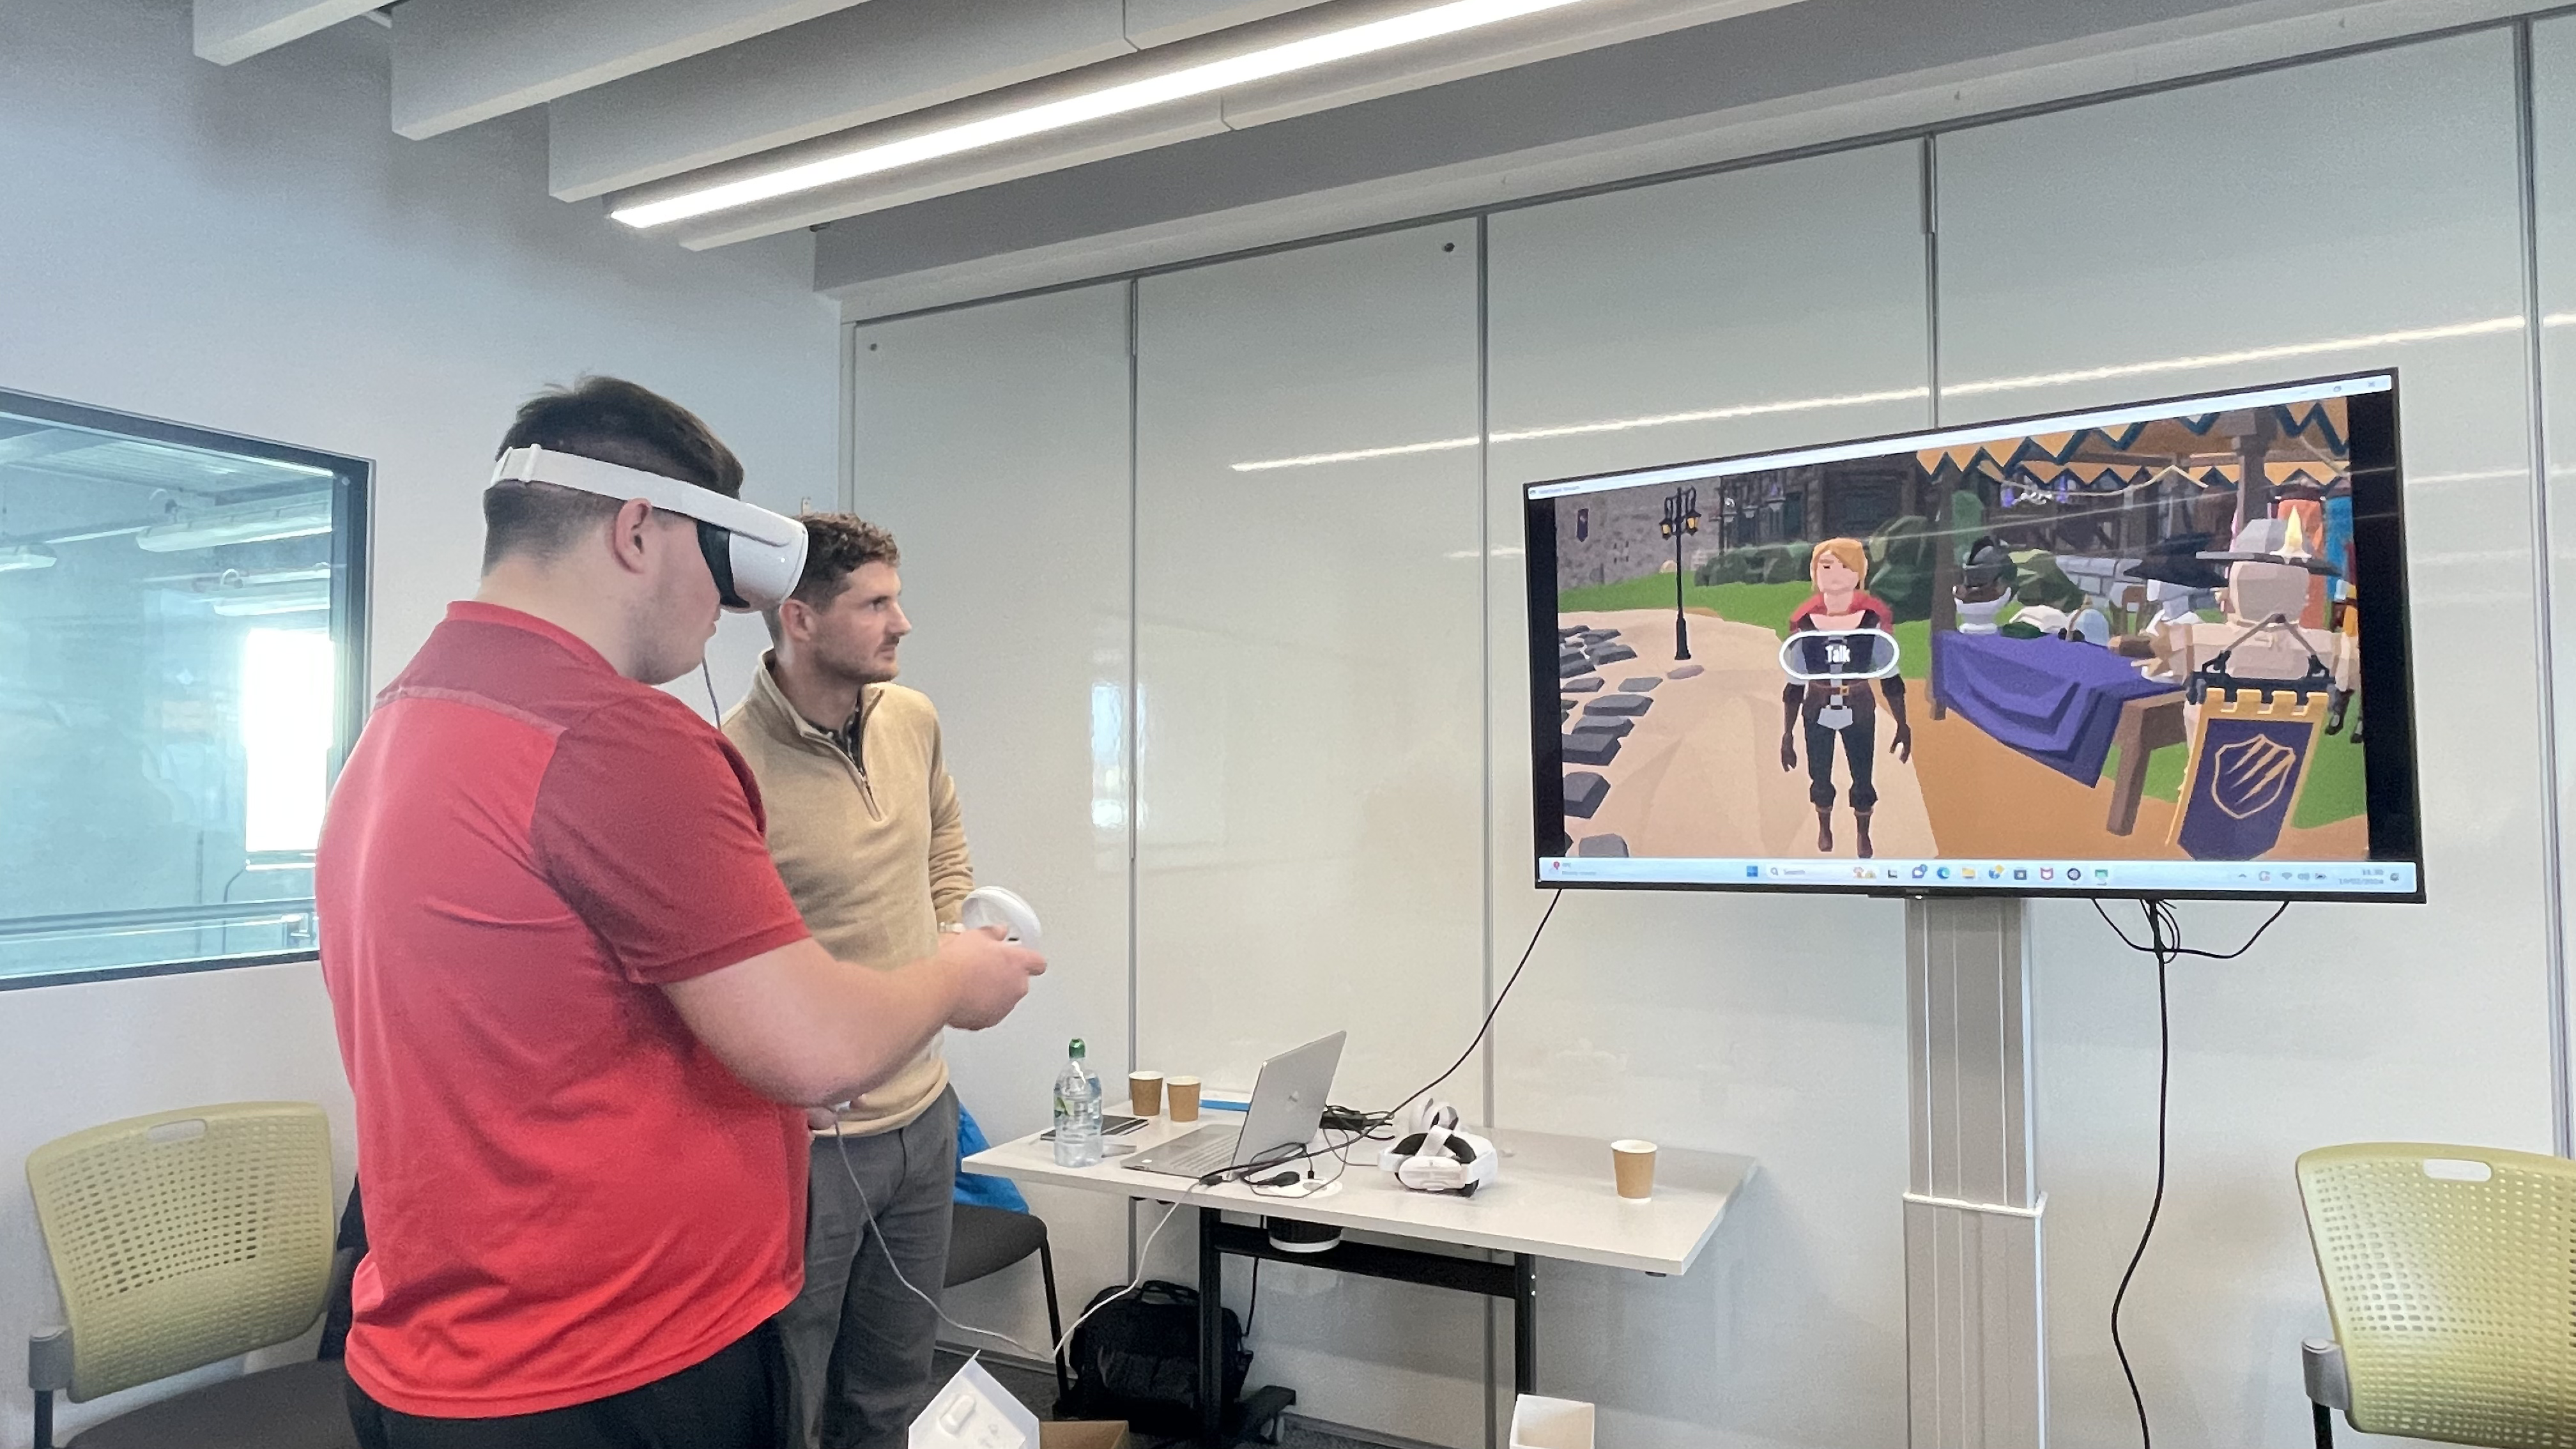 The Construction Industry meets Virtual Reality: Highlights from our VR Training session